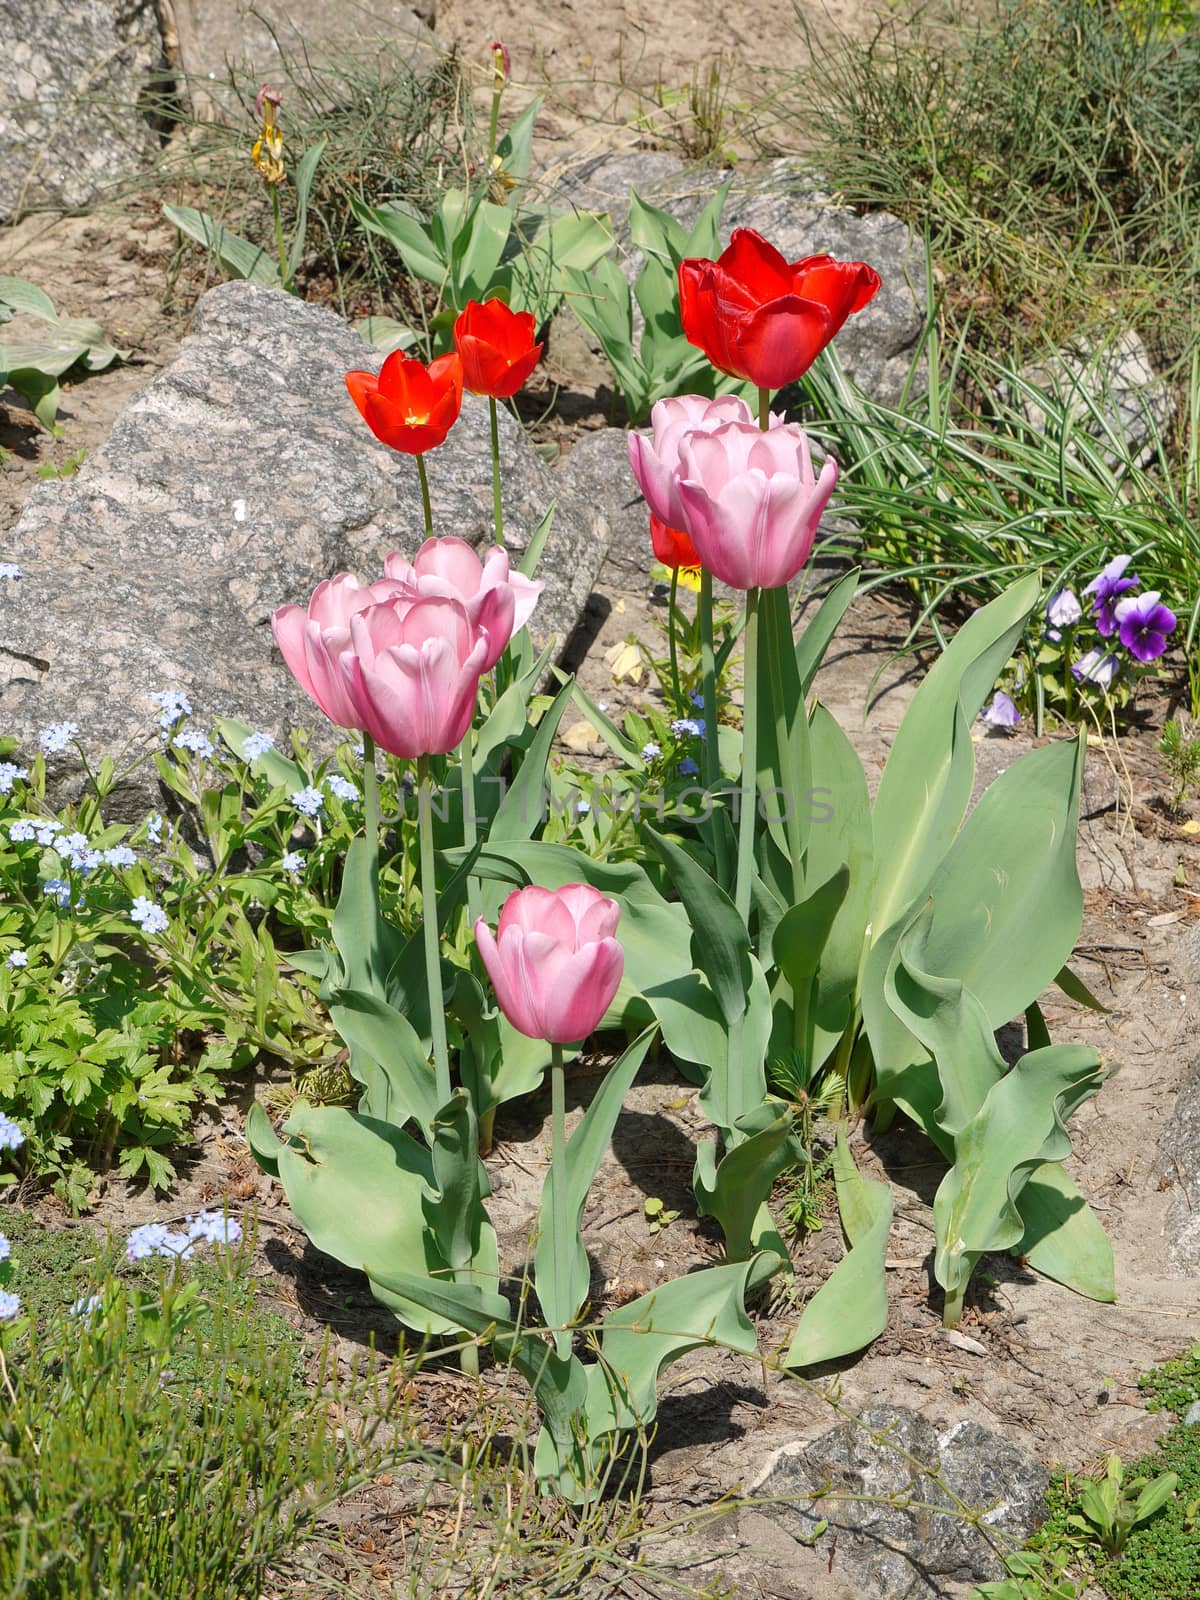 Graceful fresh with pink petals of tulips. Growing among small stones and grass under the scorching sun.